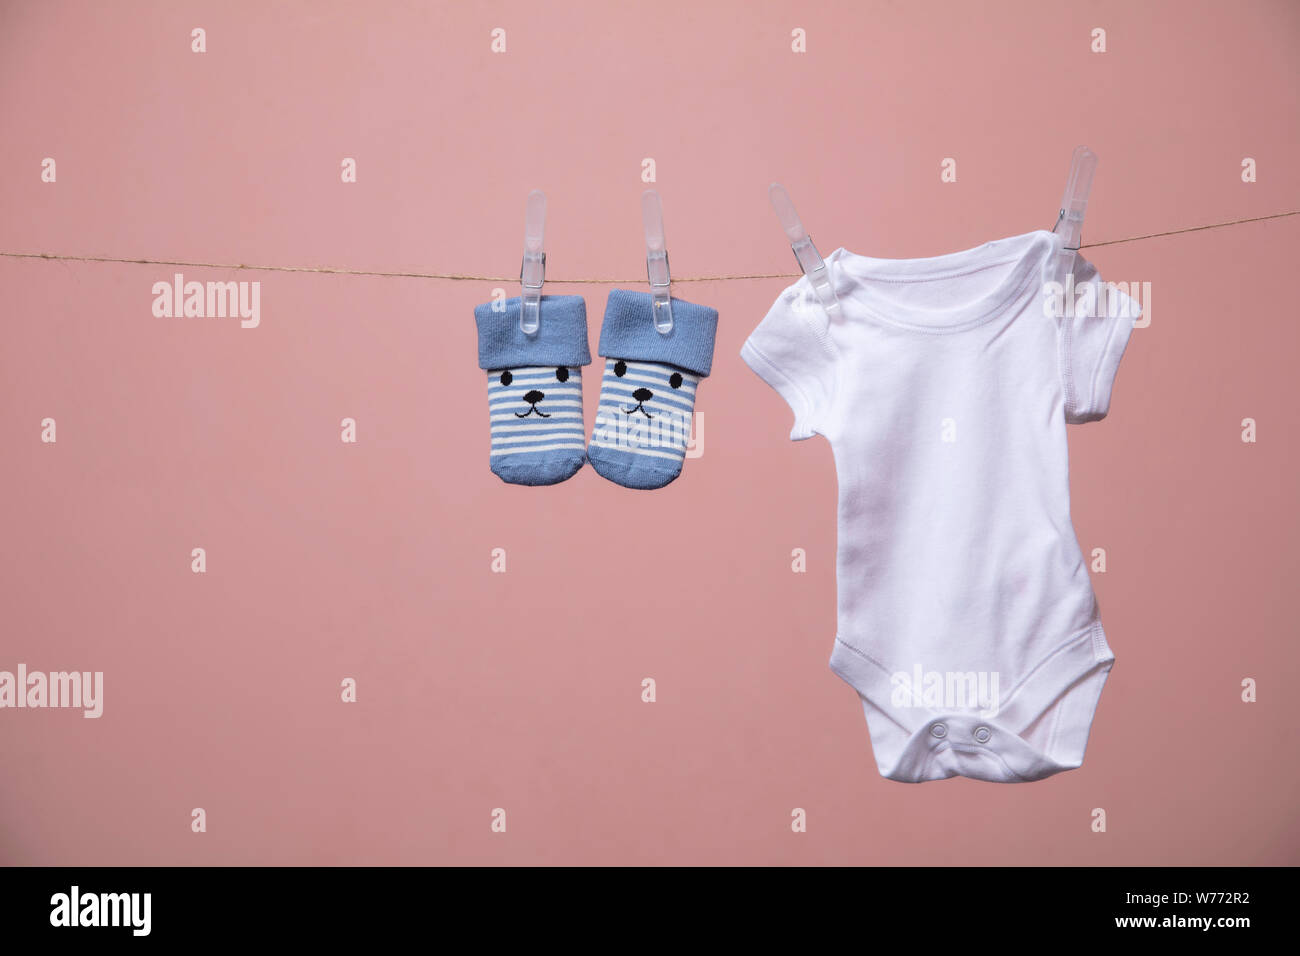 White baby body suit hanging from a line against a pink background Stock Photo